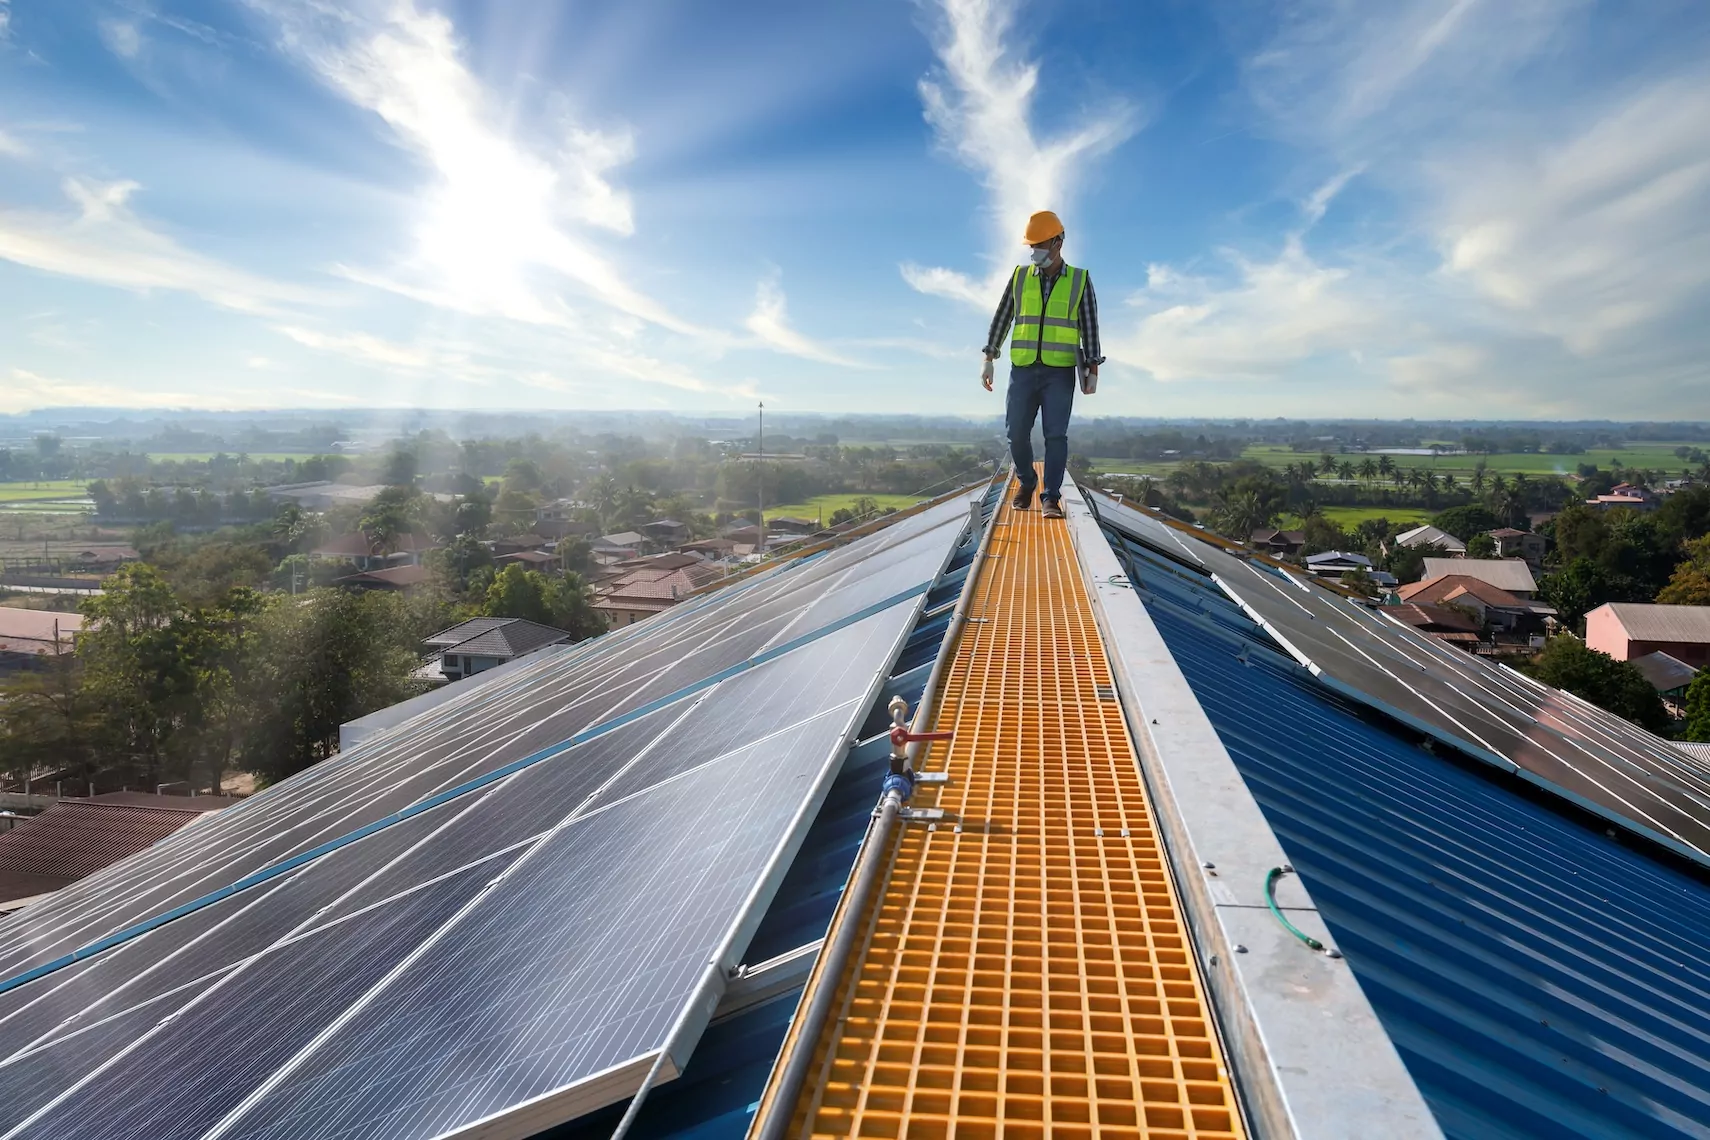 Technician walking on solar paneled roof with sunlight in the background